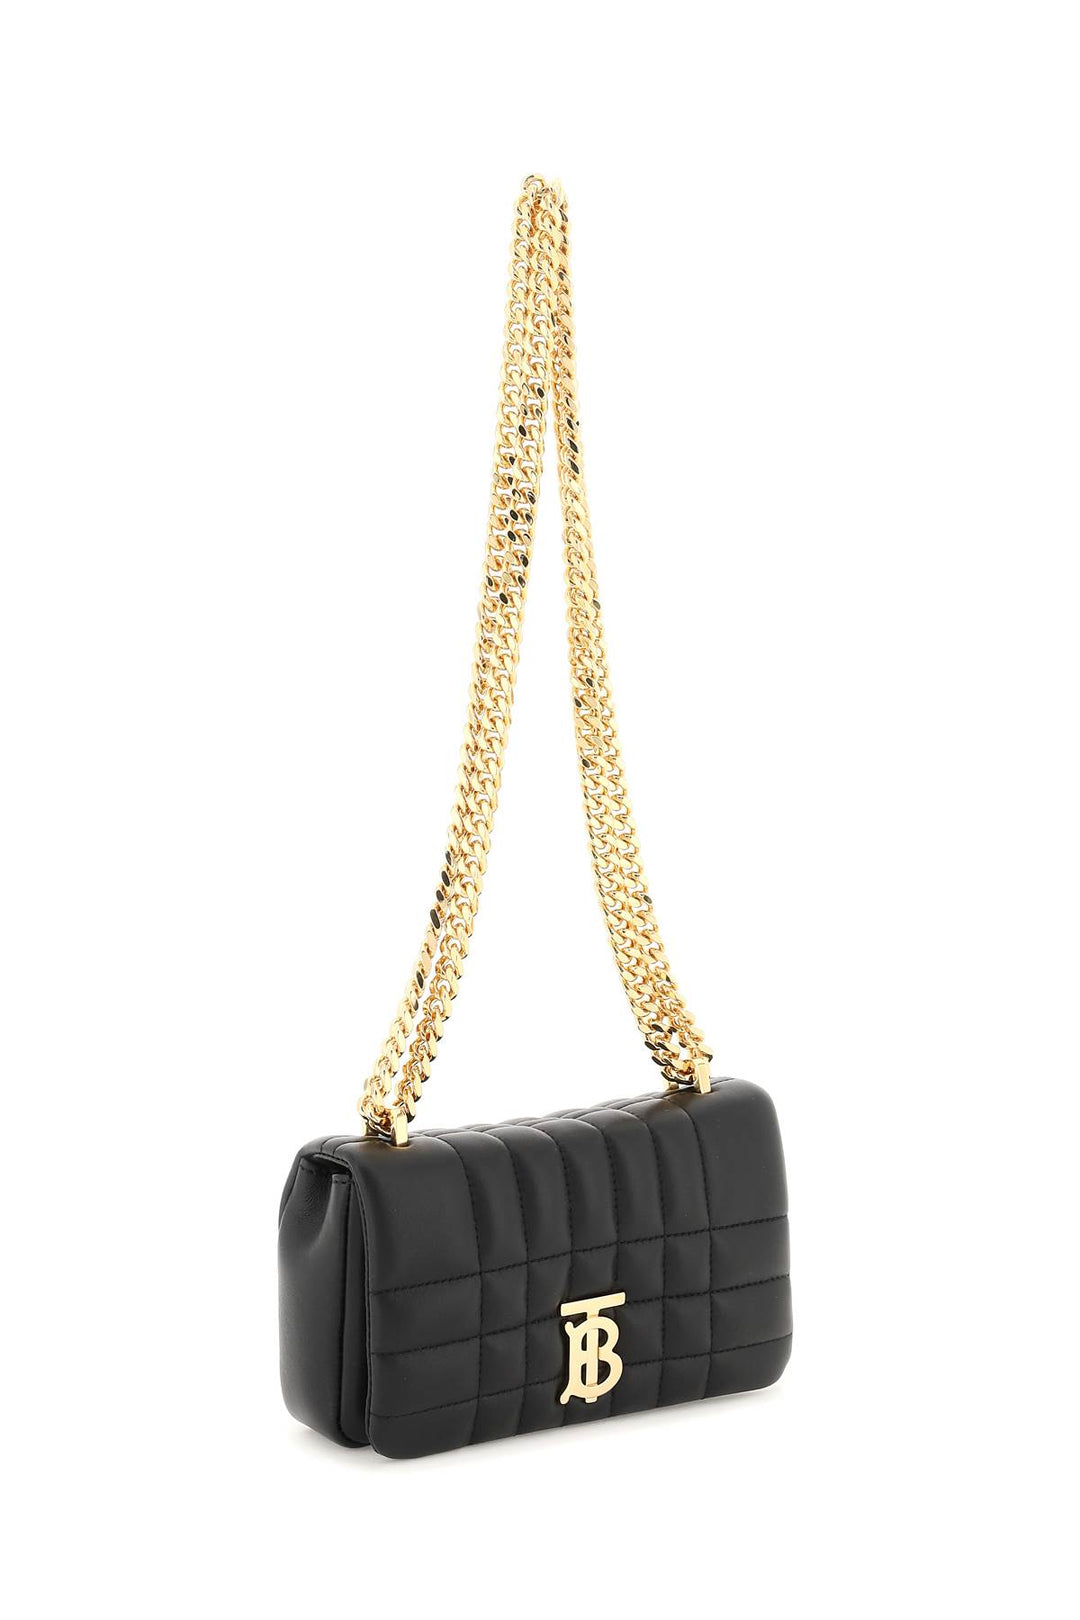 Burberry Quilted Leather Lola Mini Bag   Nero